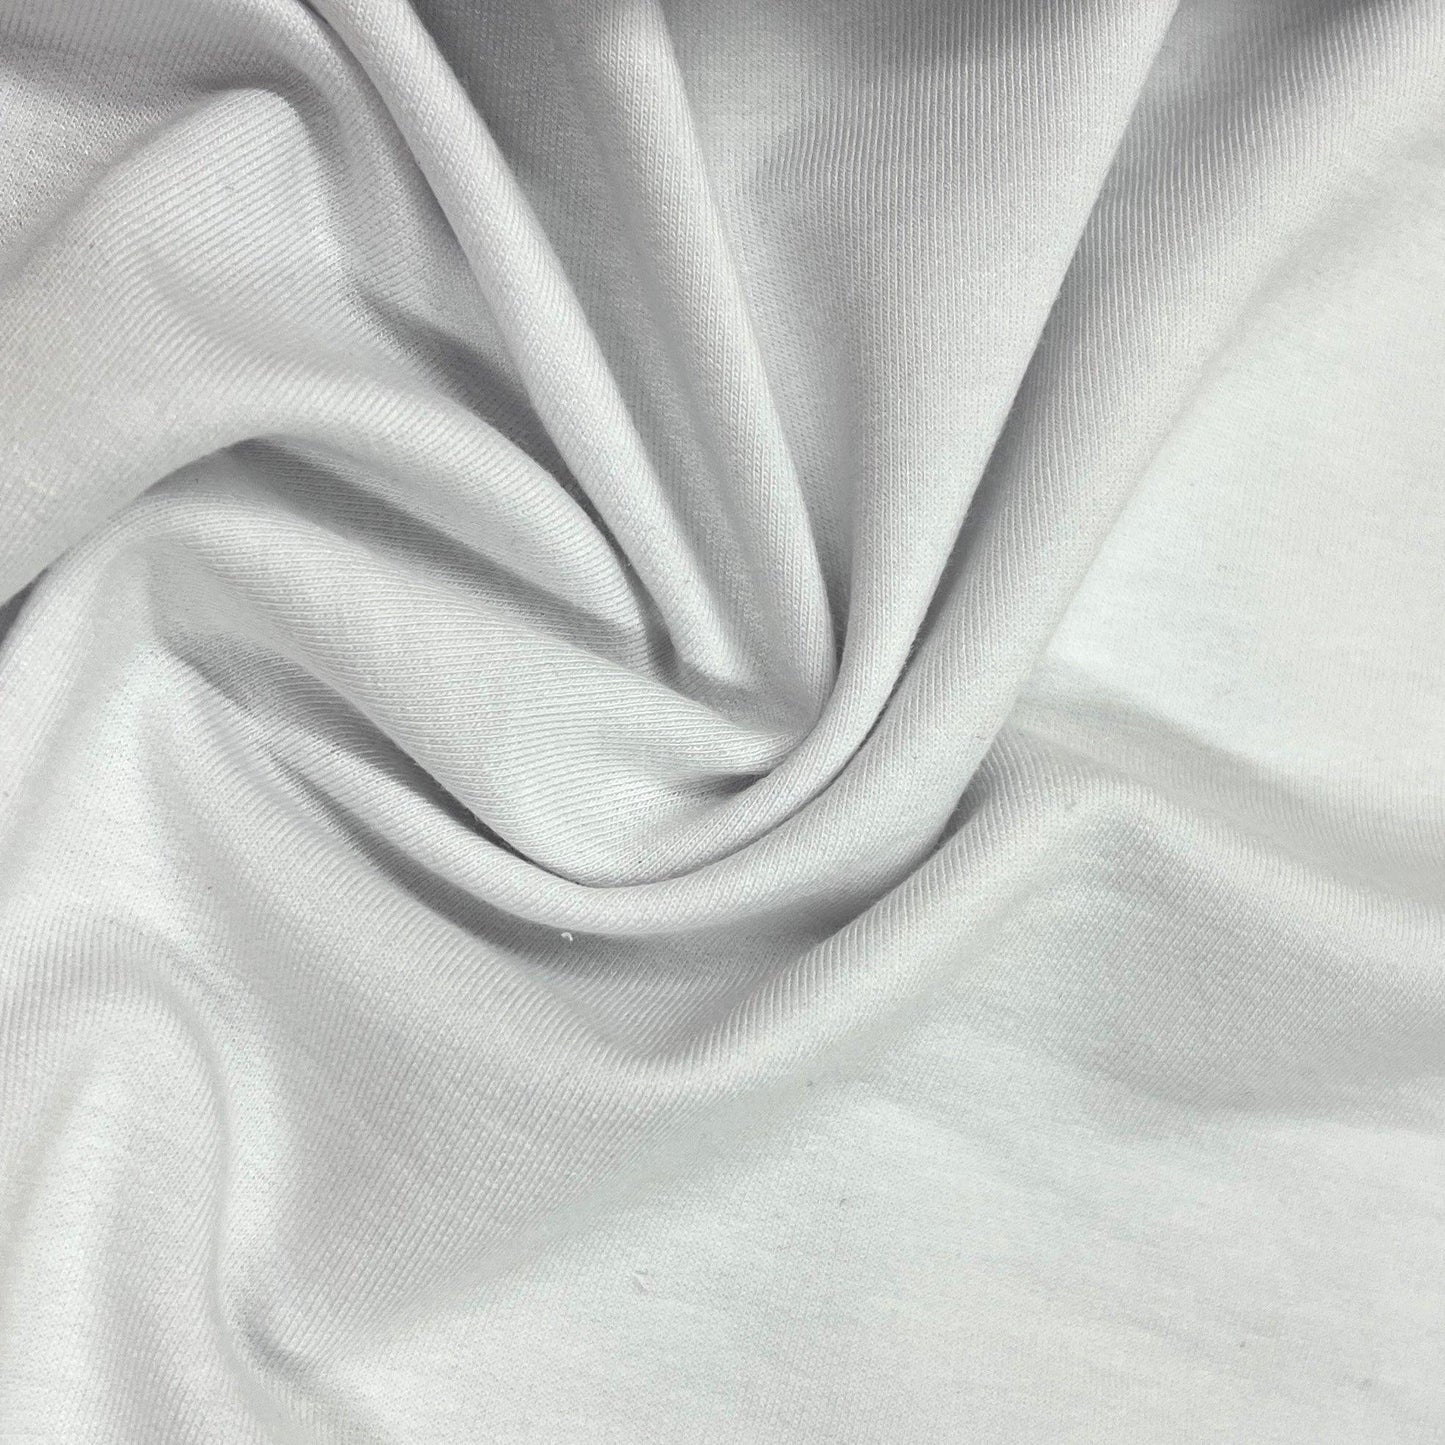 White Bamboo Stretch French Terry Fabric - 290 GSM, Knit in the USA, $13.80/yd, 15 Yards - Nature's Fabrics